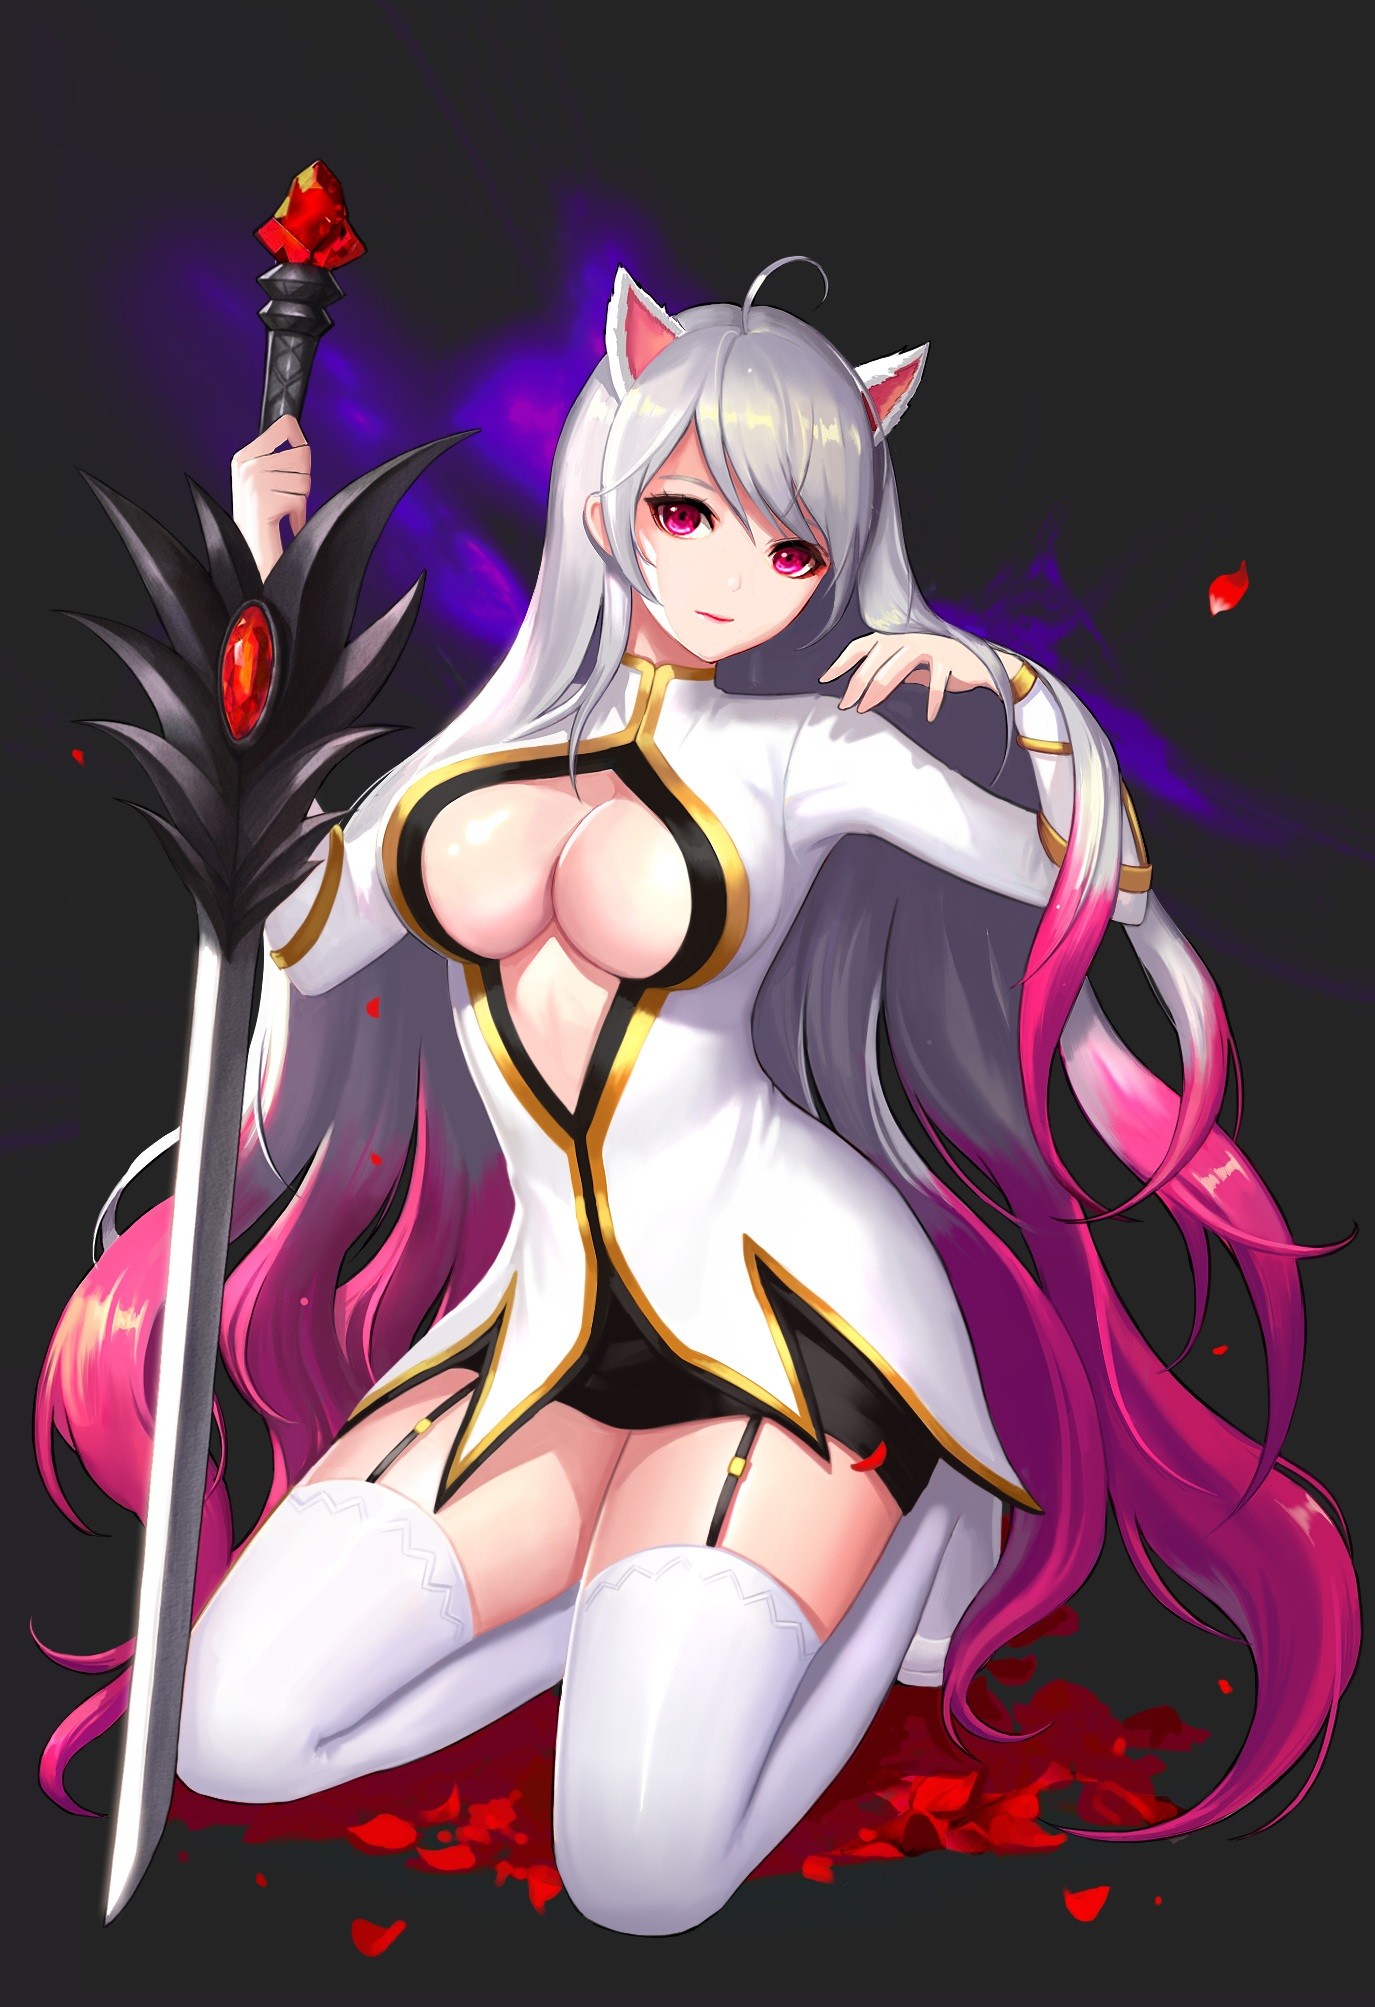 Anime 1375x2007 anime anime girls Dungeon and Fighter animal ears dress cat girl no bra stockings sword pink eyes long hair gray hair pink hair boobs big boobs women with swords girls with guns fantasy art fantasy girl women white stockings dark background